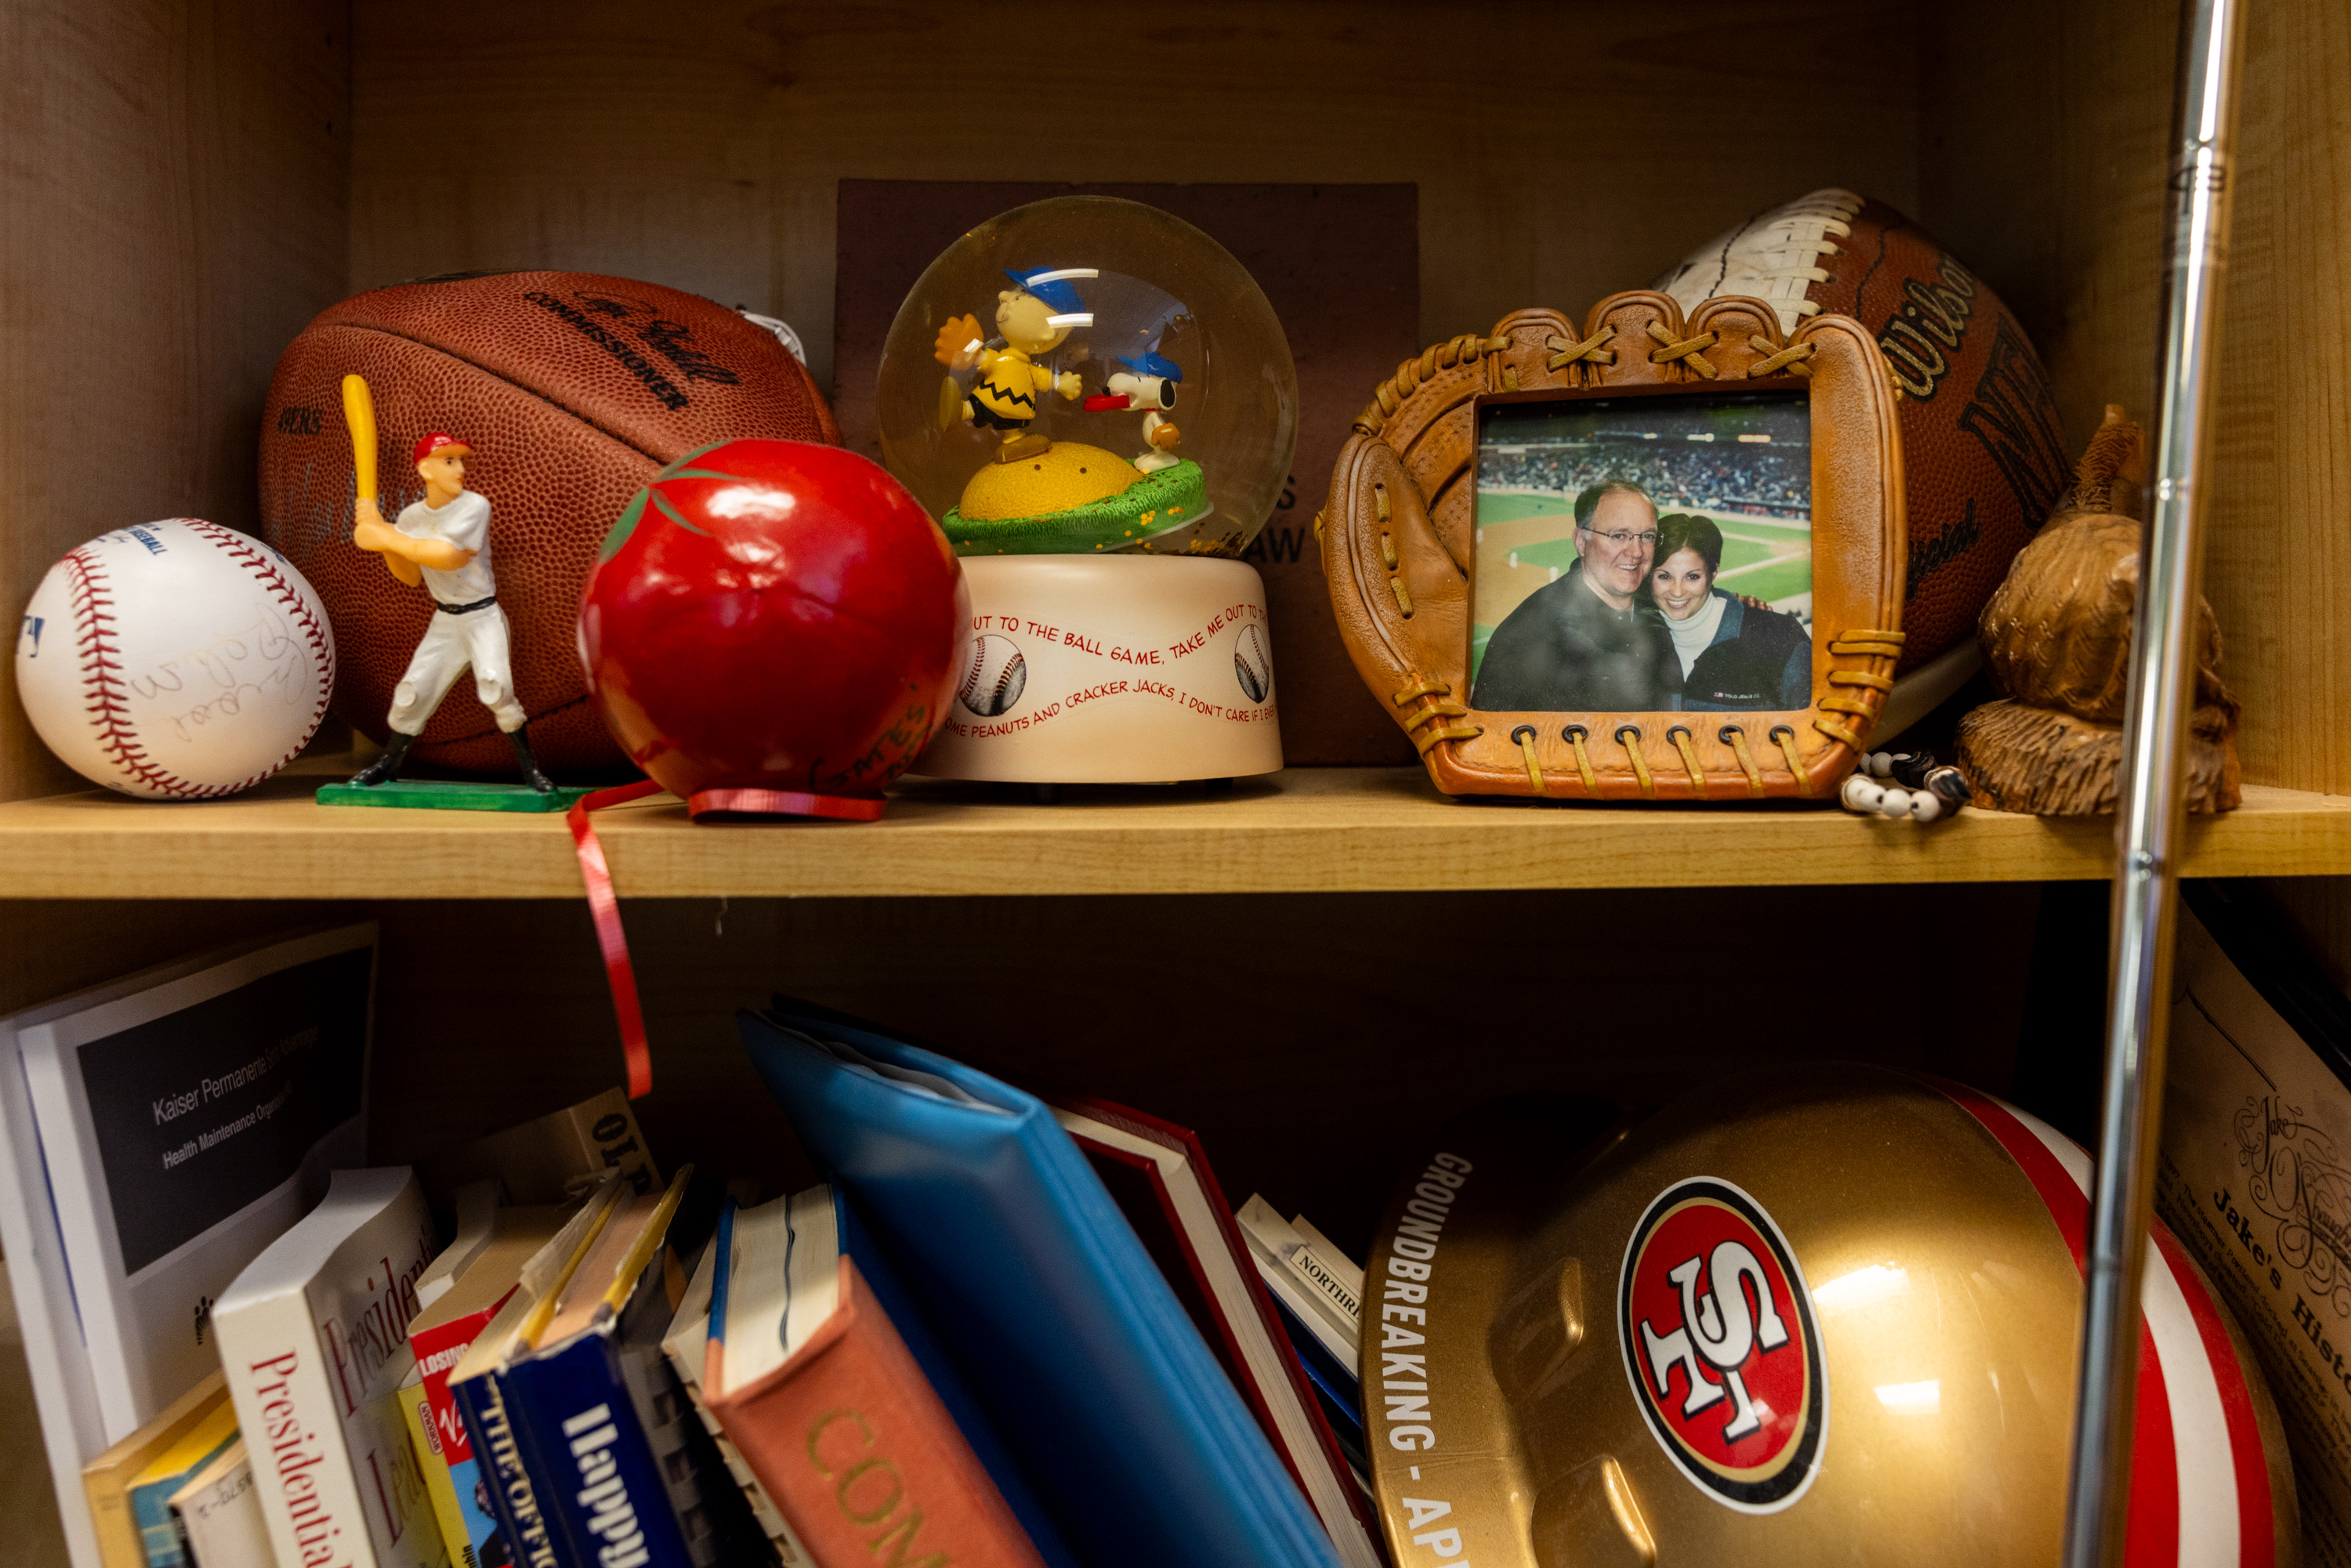 A shelf holds a basketball, baseball, figurine, snow globe, photo in a mitt frame, red apple, books, and a 49ers helmet. Other small objects are also present.